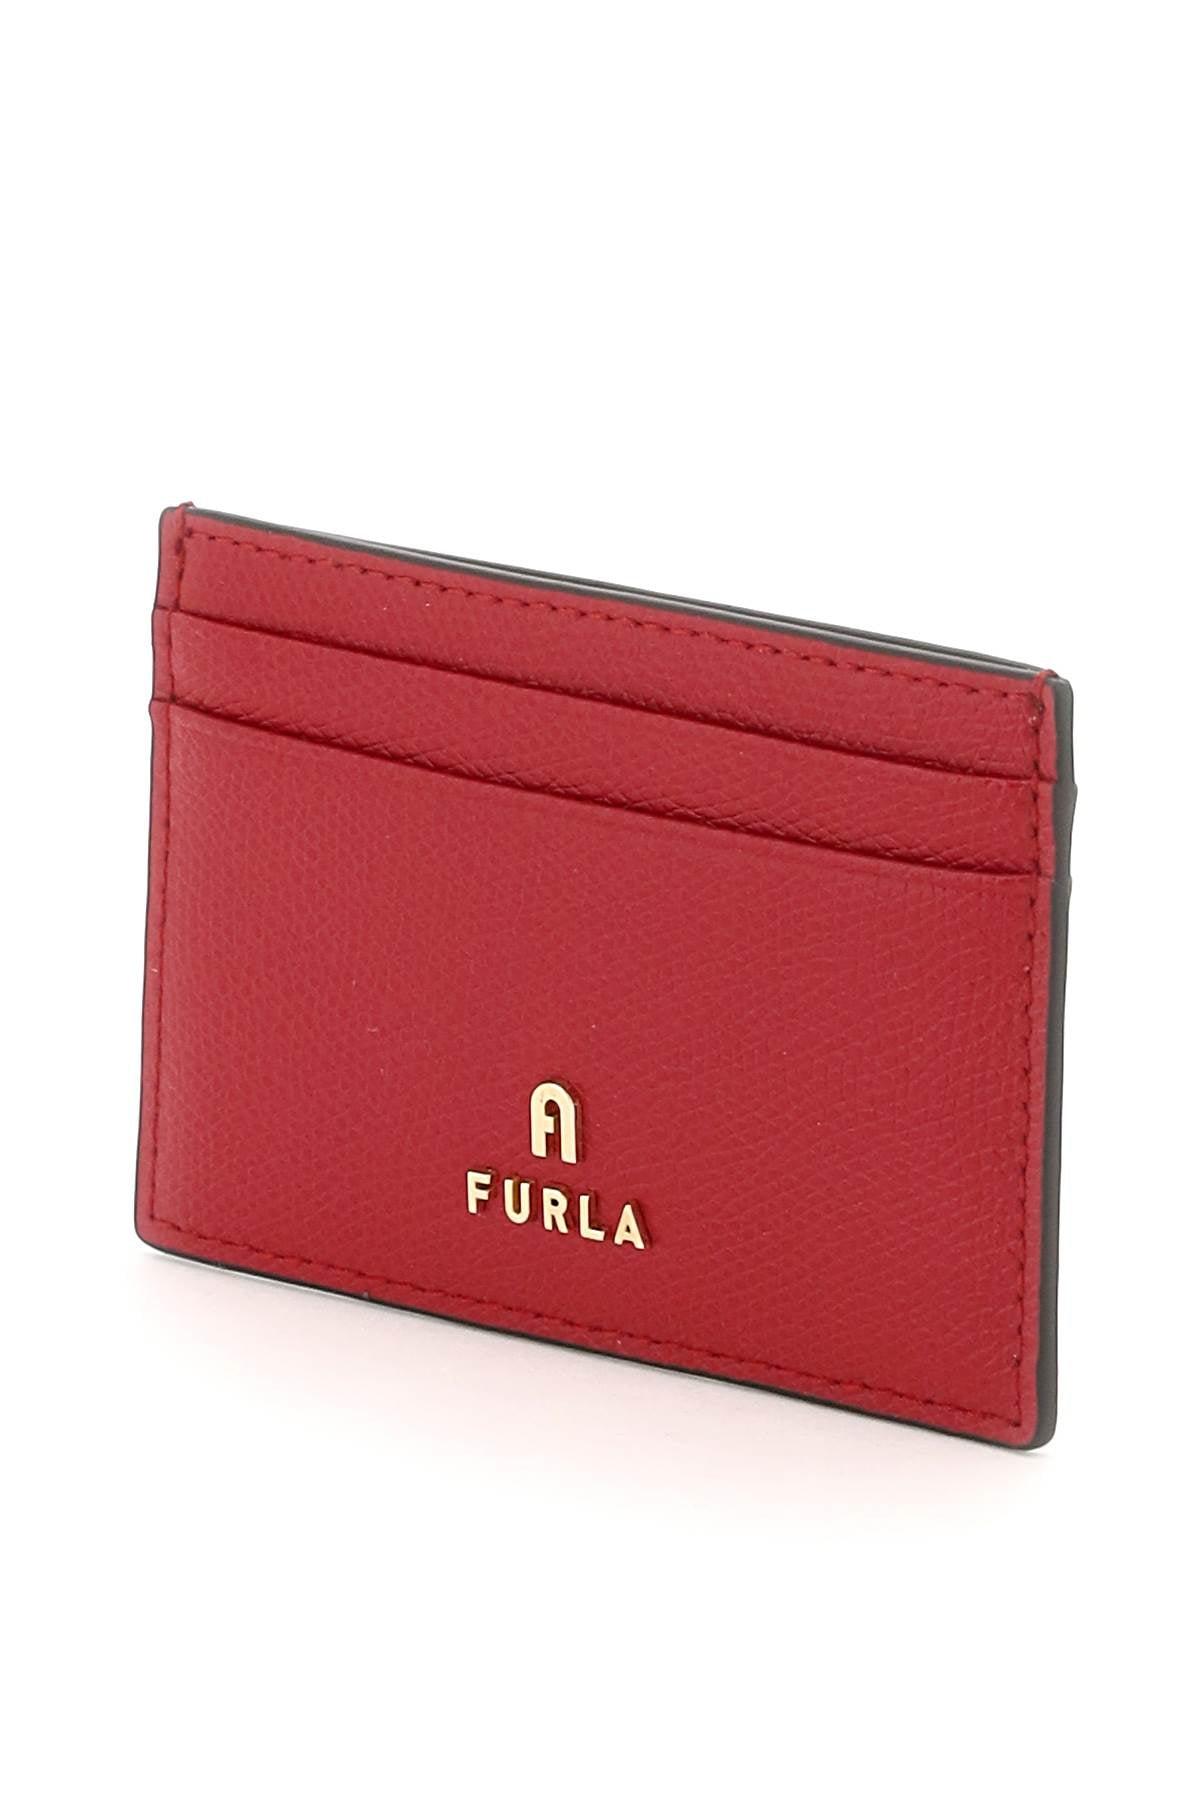 Furla 'camelia' Card Holder in Red | Lyst